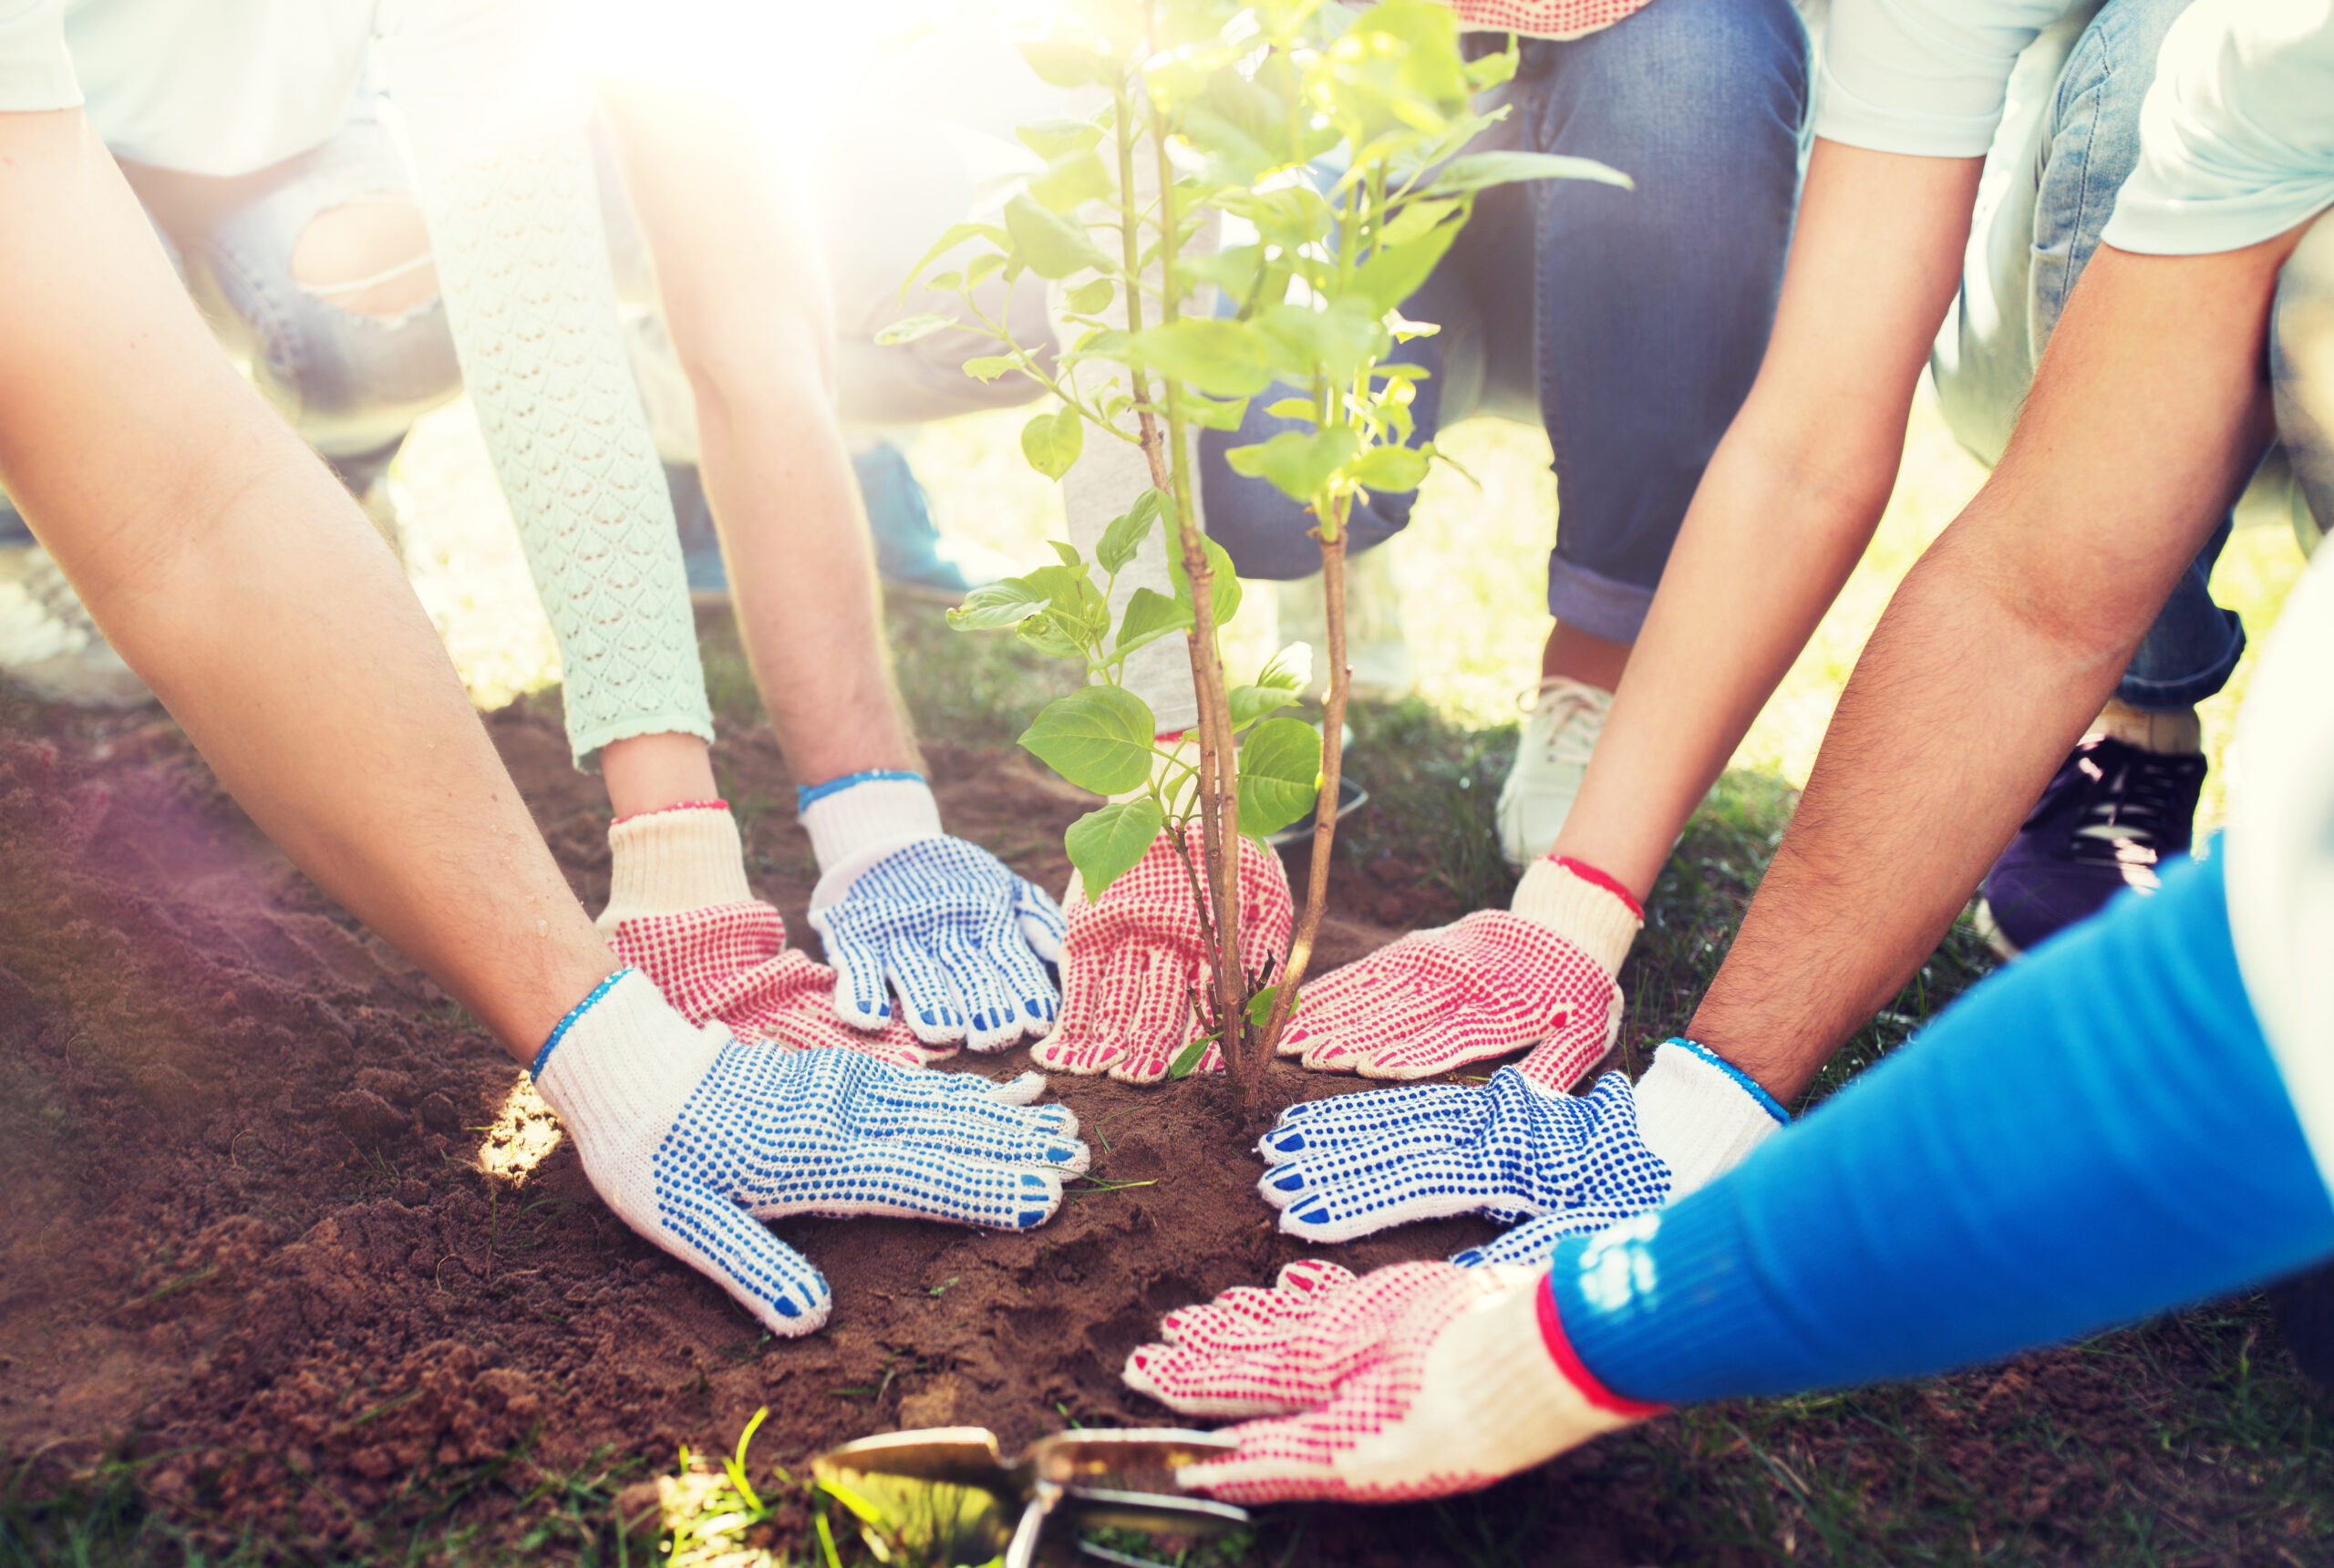 volunteers with gardening gloves working together to plant a tree